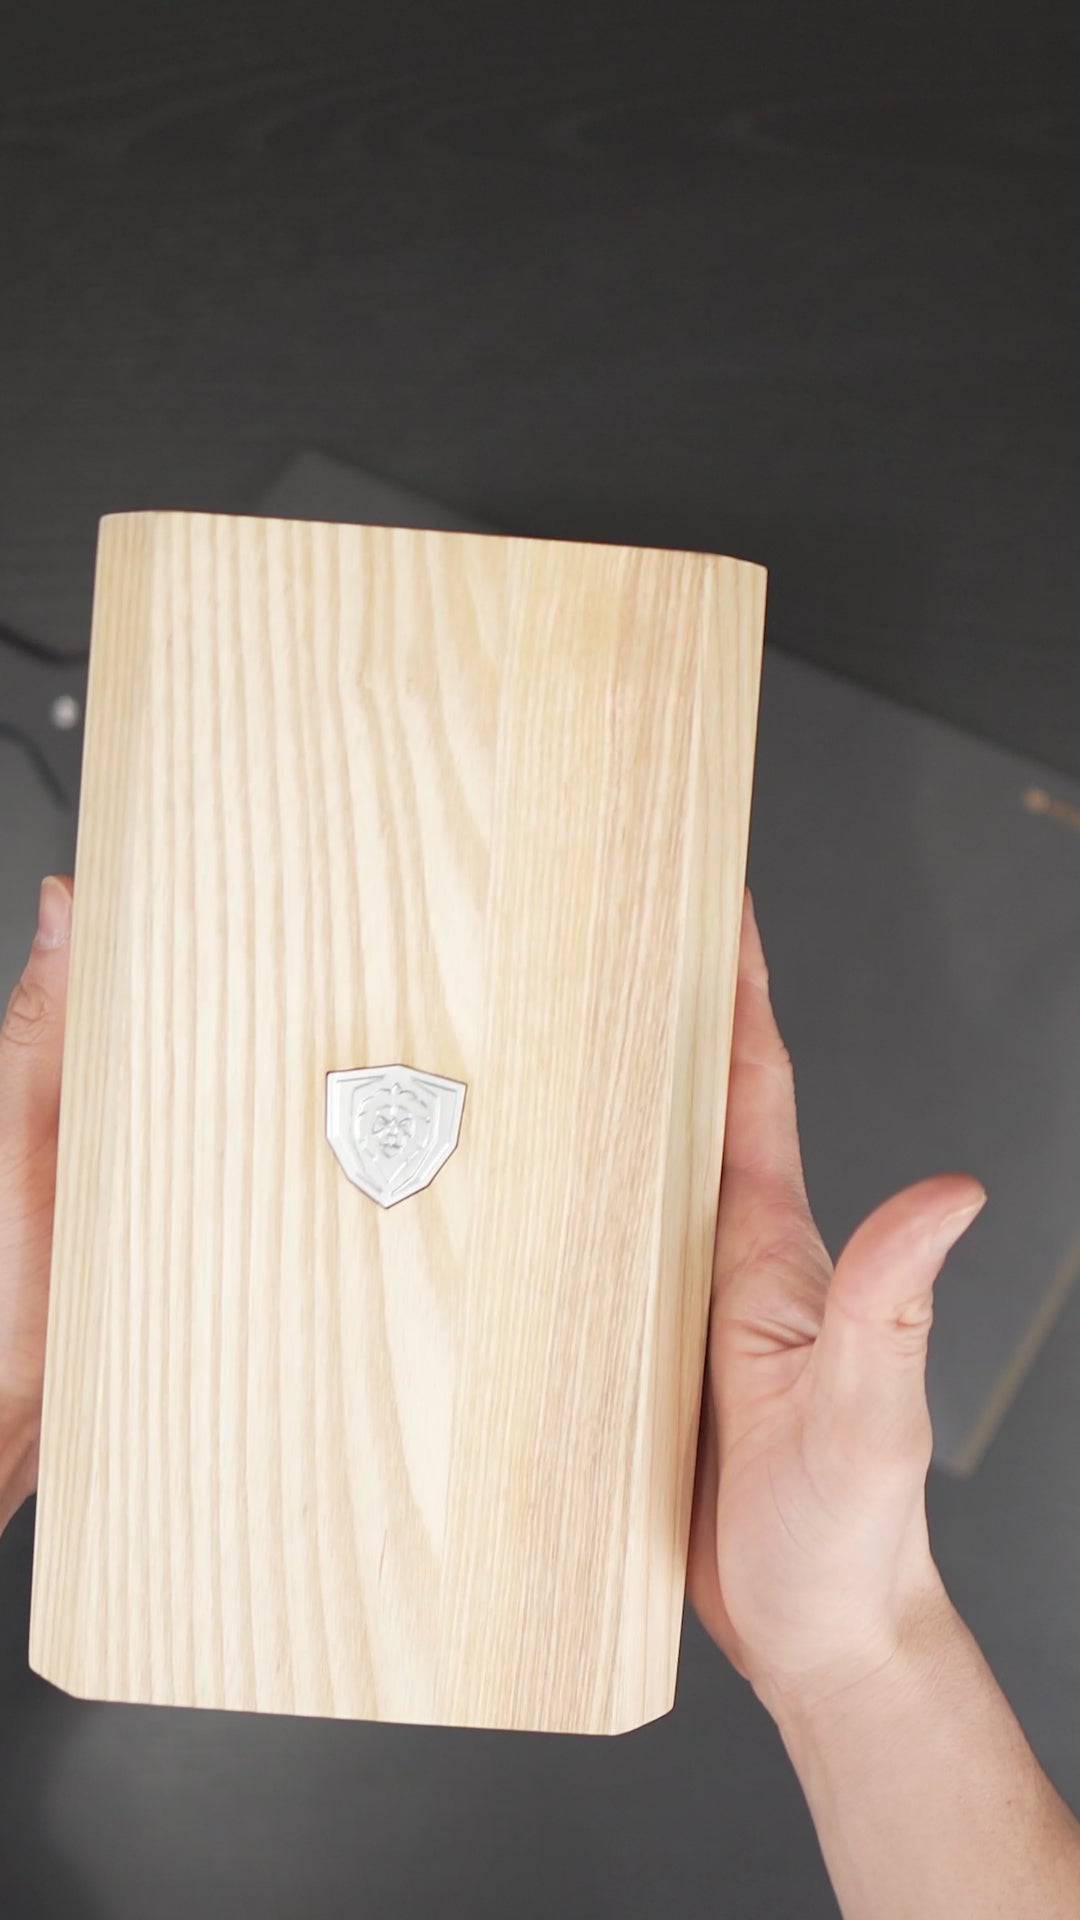 Unboxing the Dalstrong 18 slots universal knife block featuring it's wooden block.